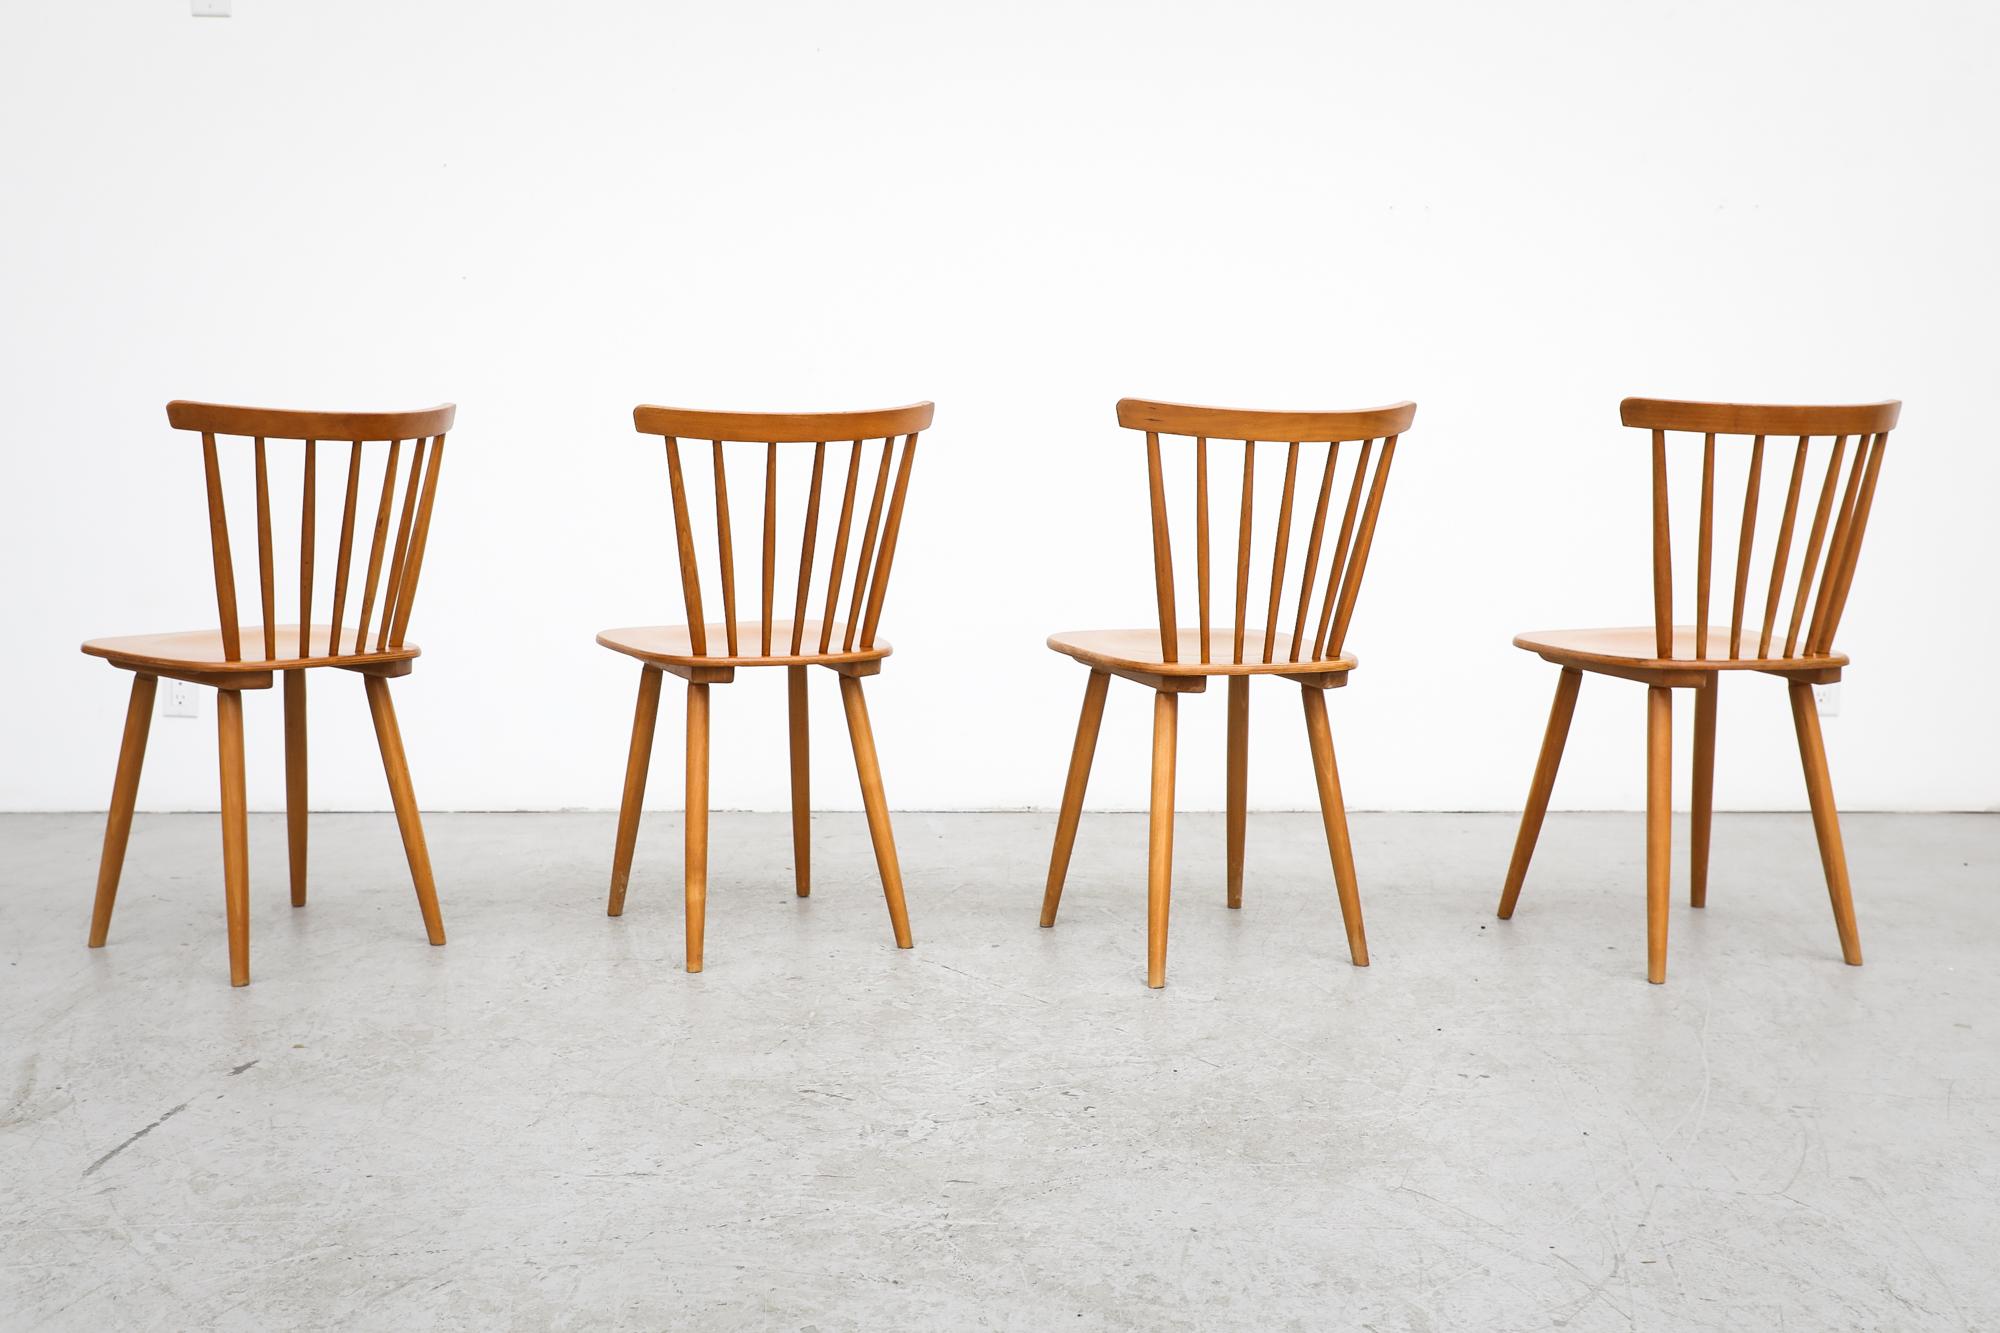 Set of 4 Blonde Wood Tapiovaara Inspired Spindle Back Chairs by Farstrup In Good Condition For Sale In Los Angeles, CA